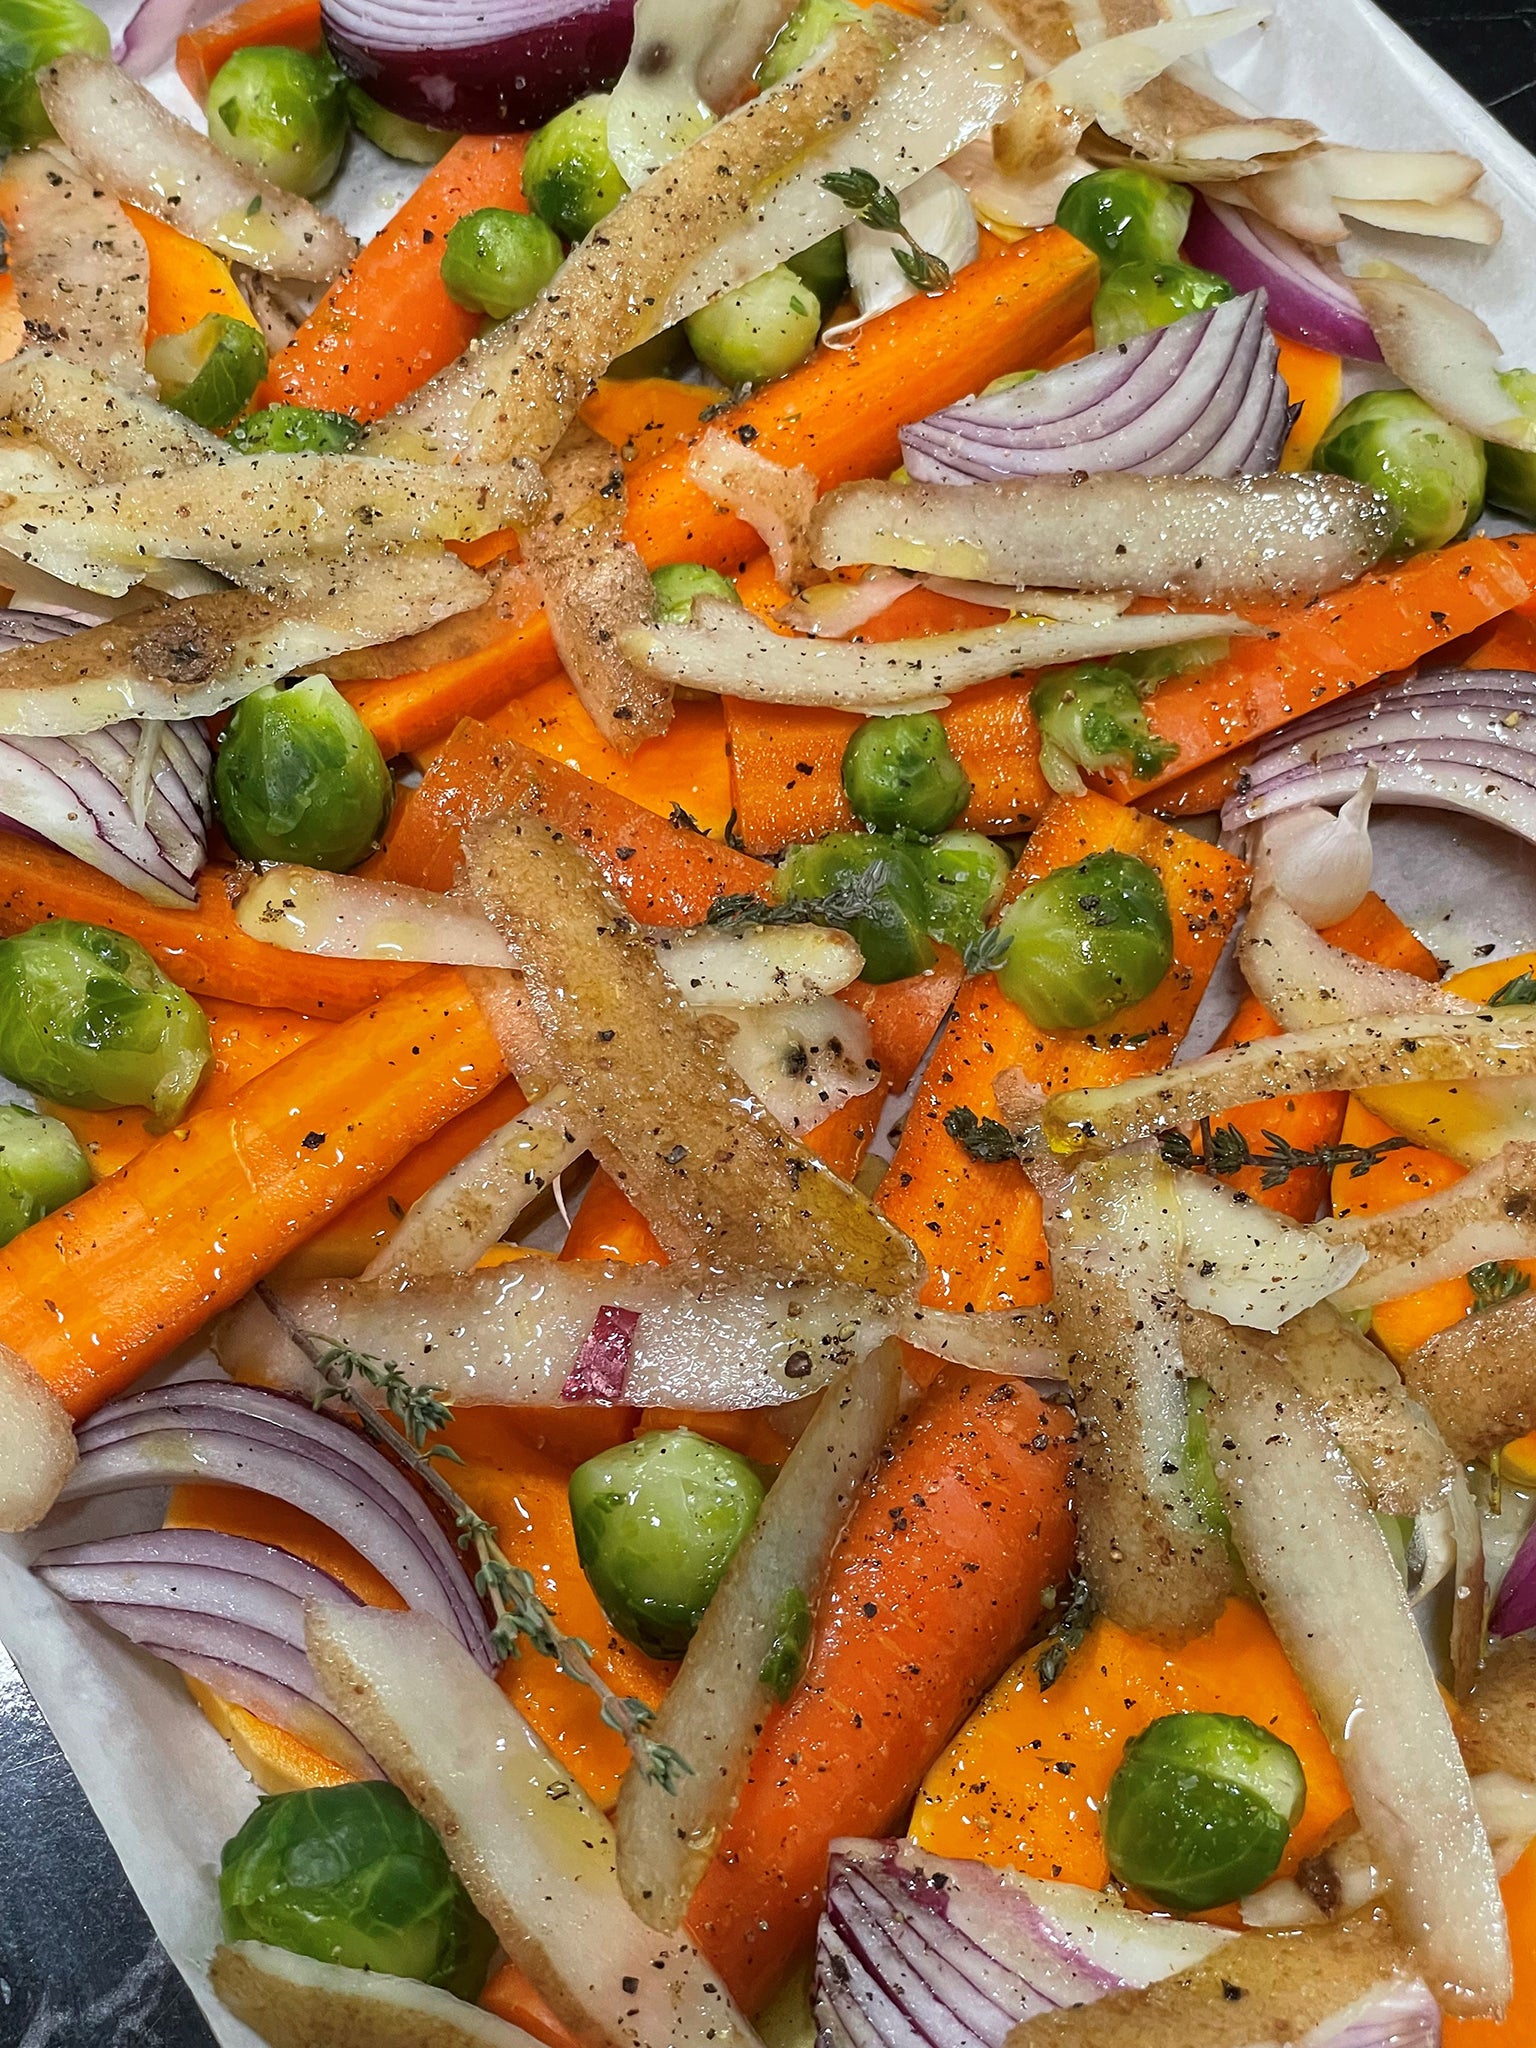 These veggies go particularly well with gratin dauphinois